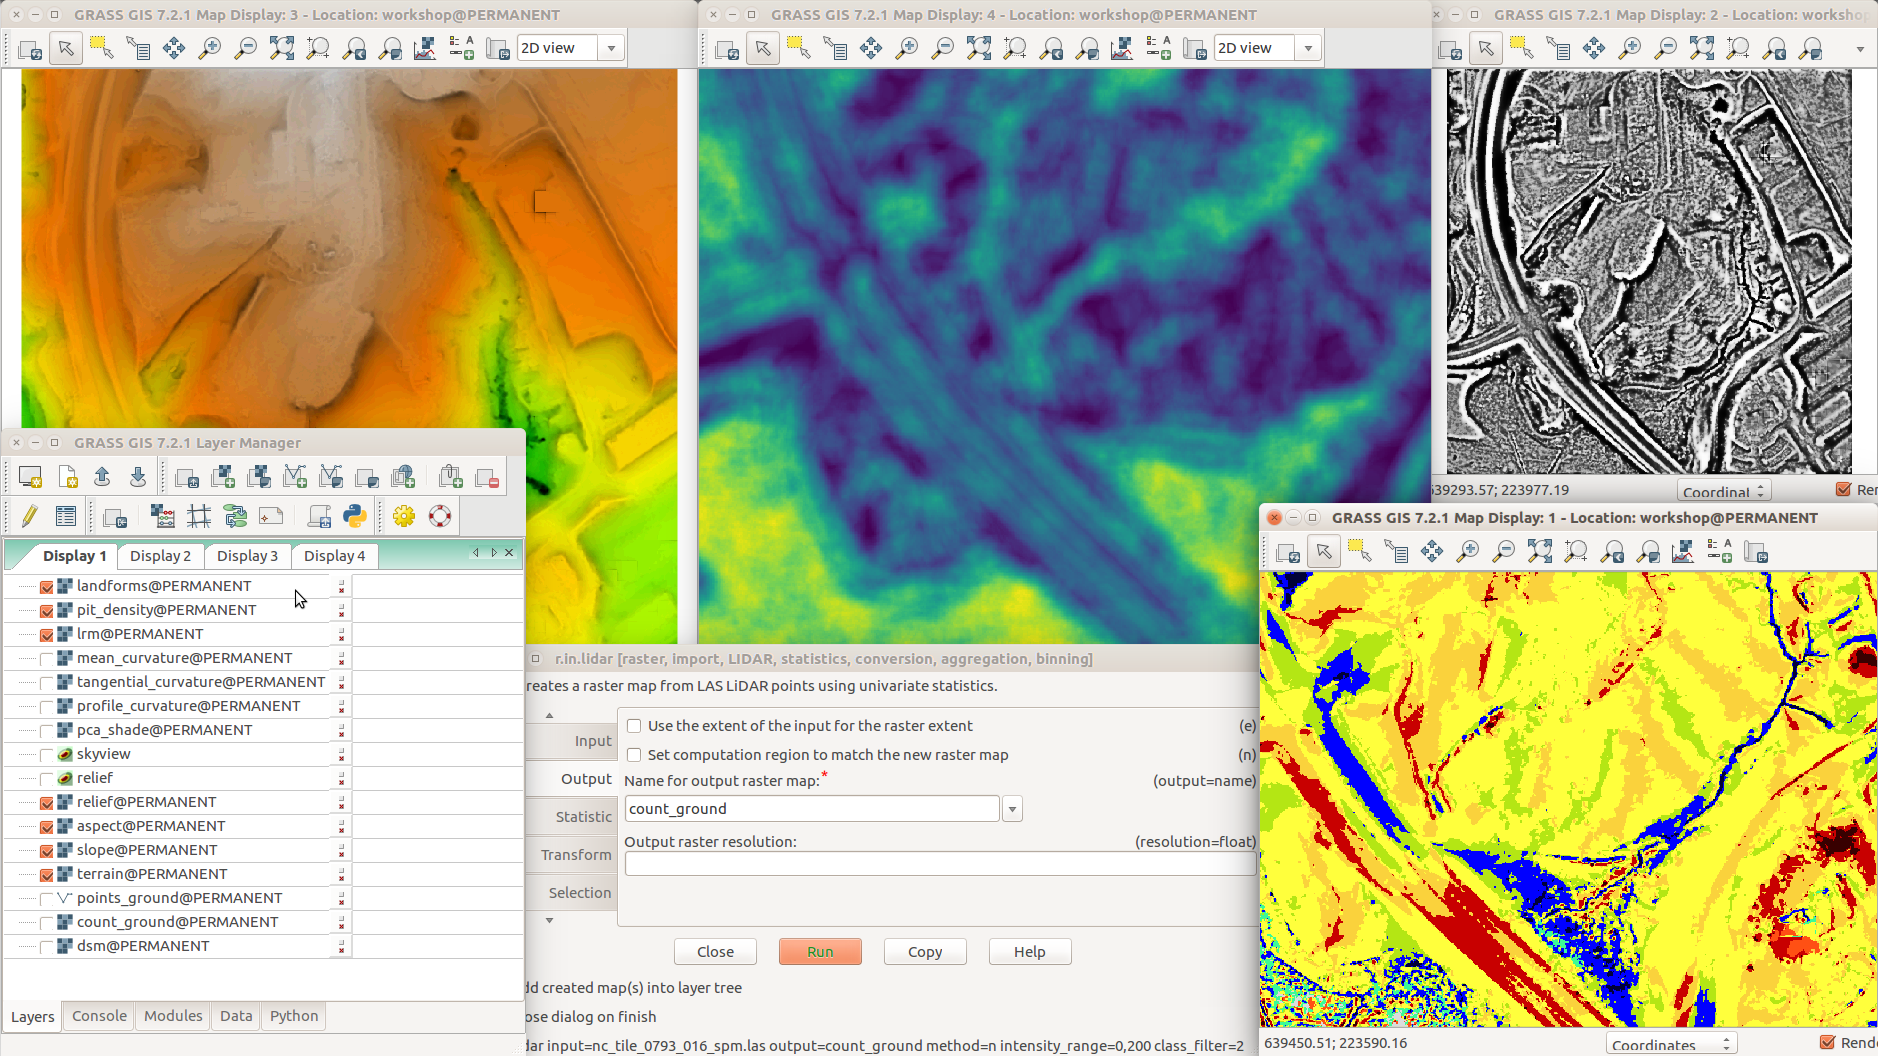 File:Different terrain analyses and visualizations in multiple Map Displays.png